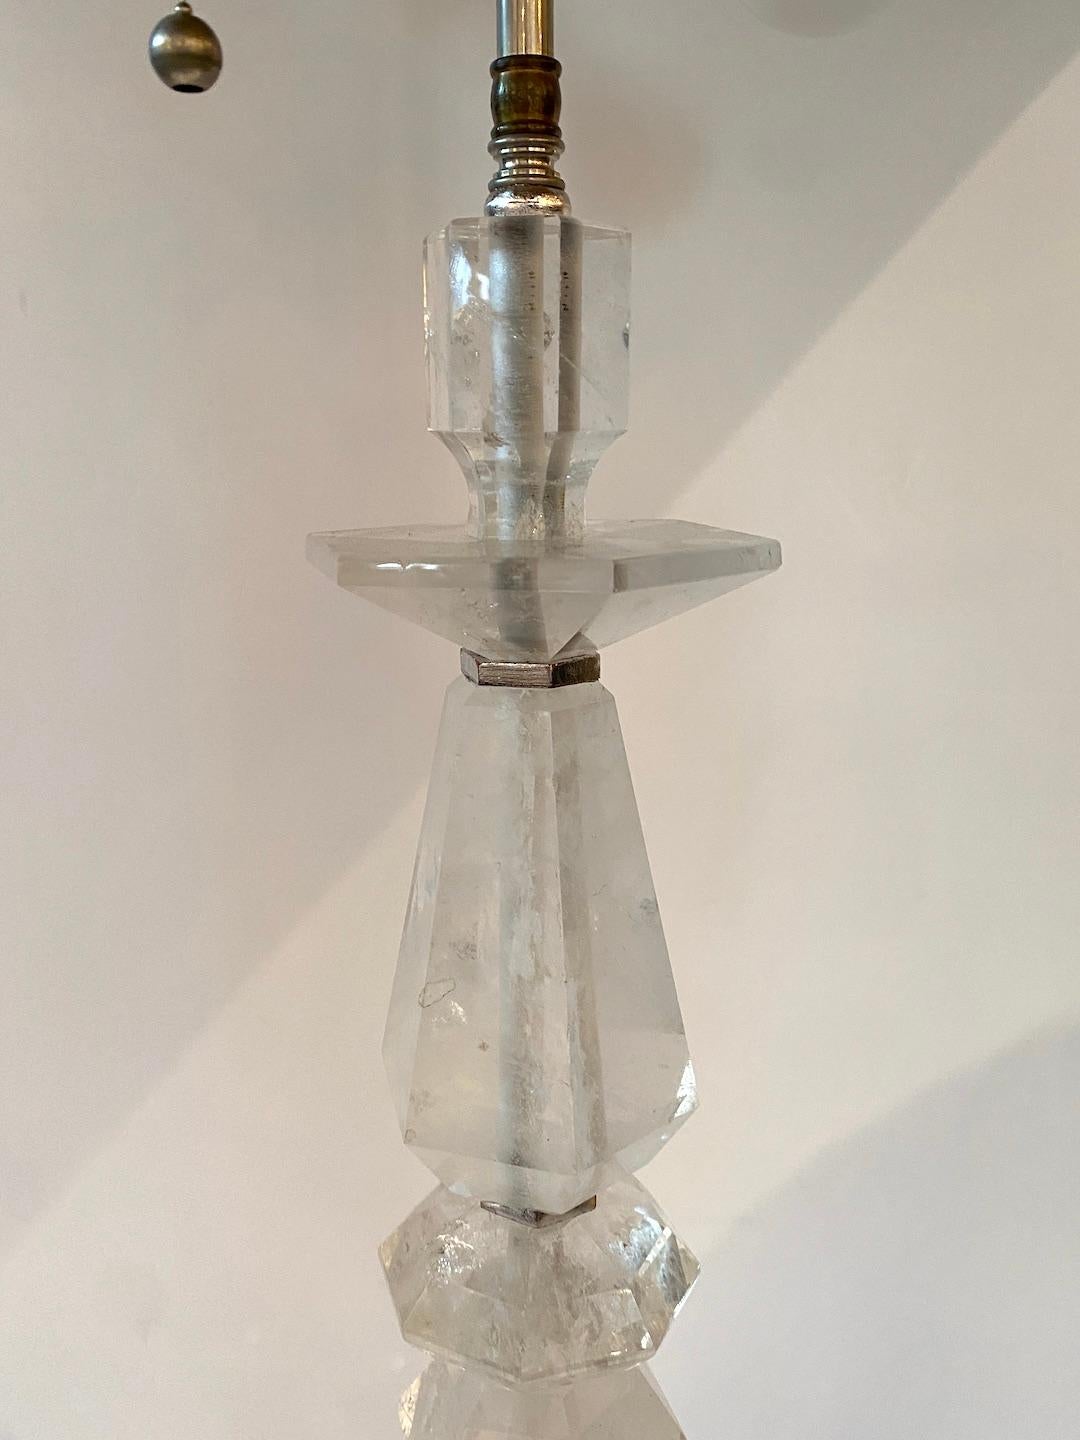 Rock Crystal from Madagascar in the form of a Neoclassical designed lamp. Silver metal spacers and base plate. New 18